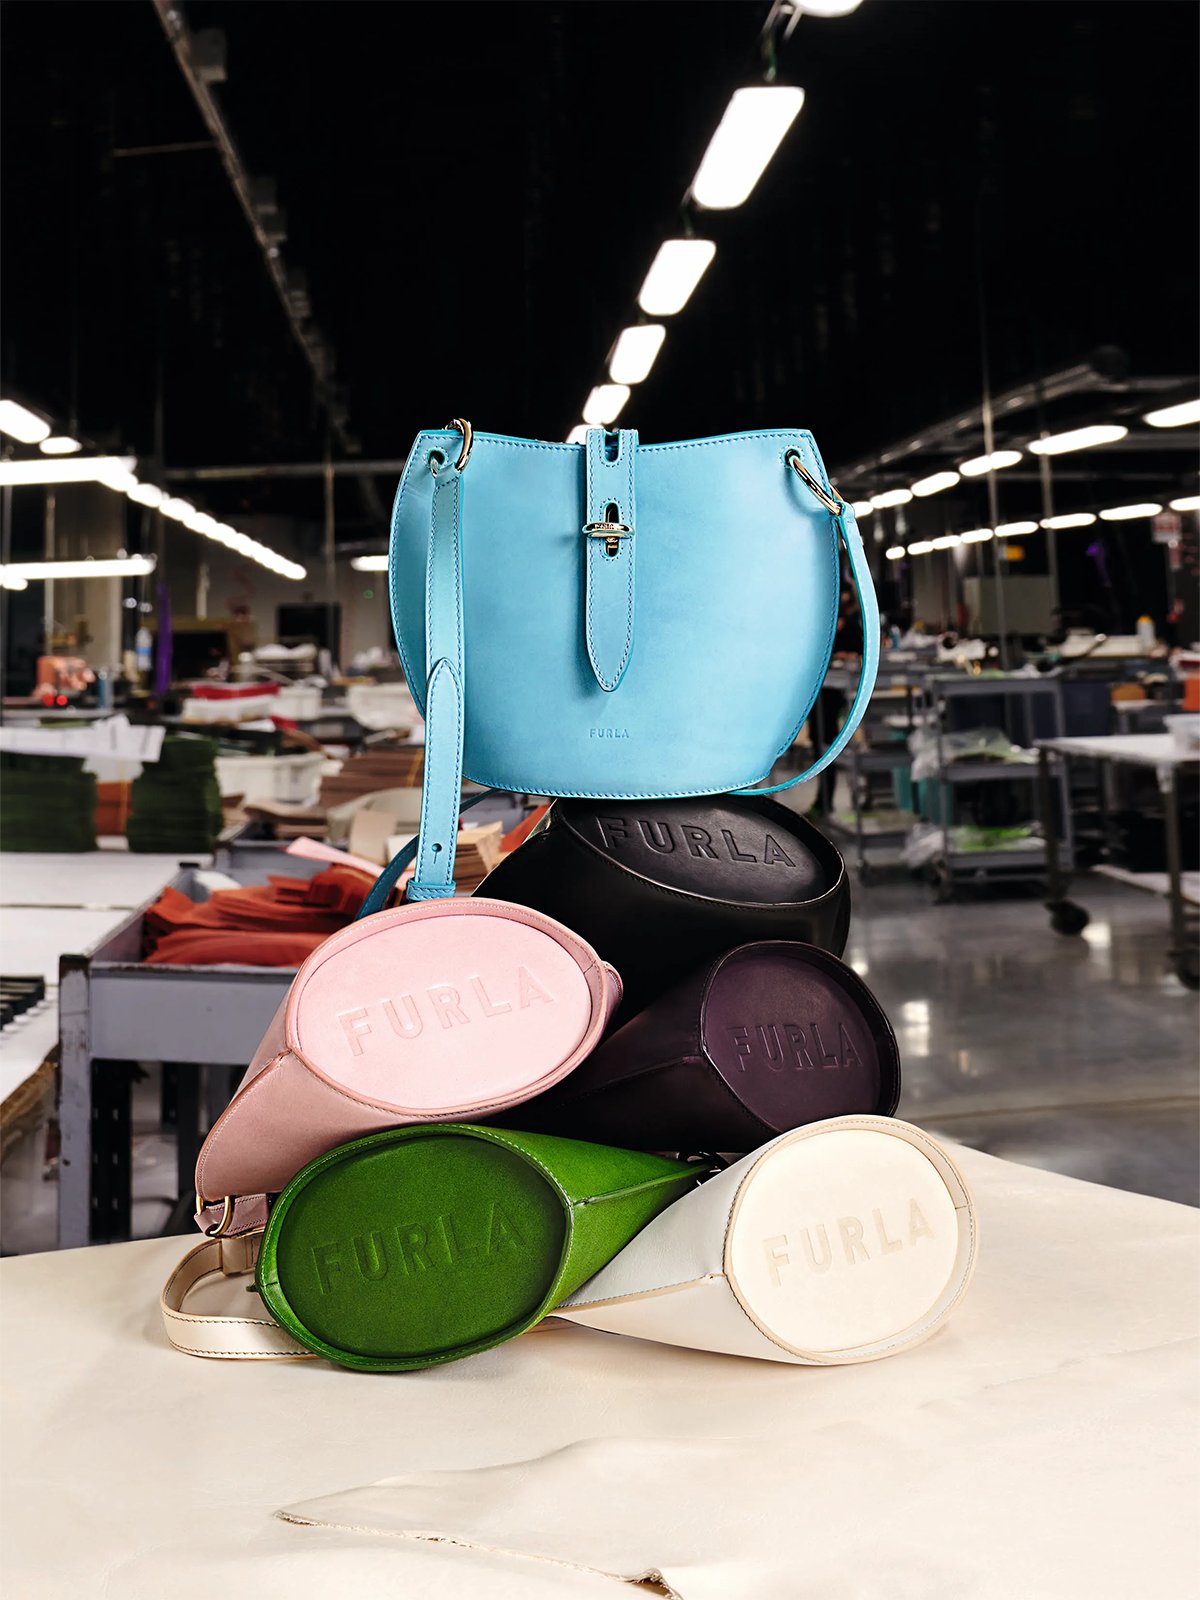 Furla and Cyclica together create Italy's first biodegradable bag